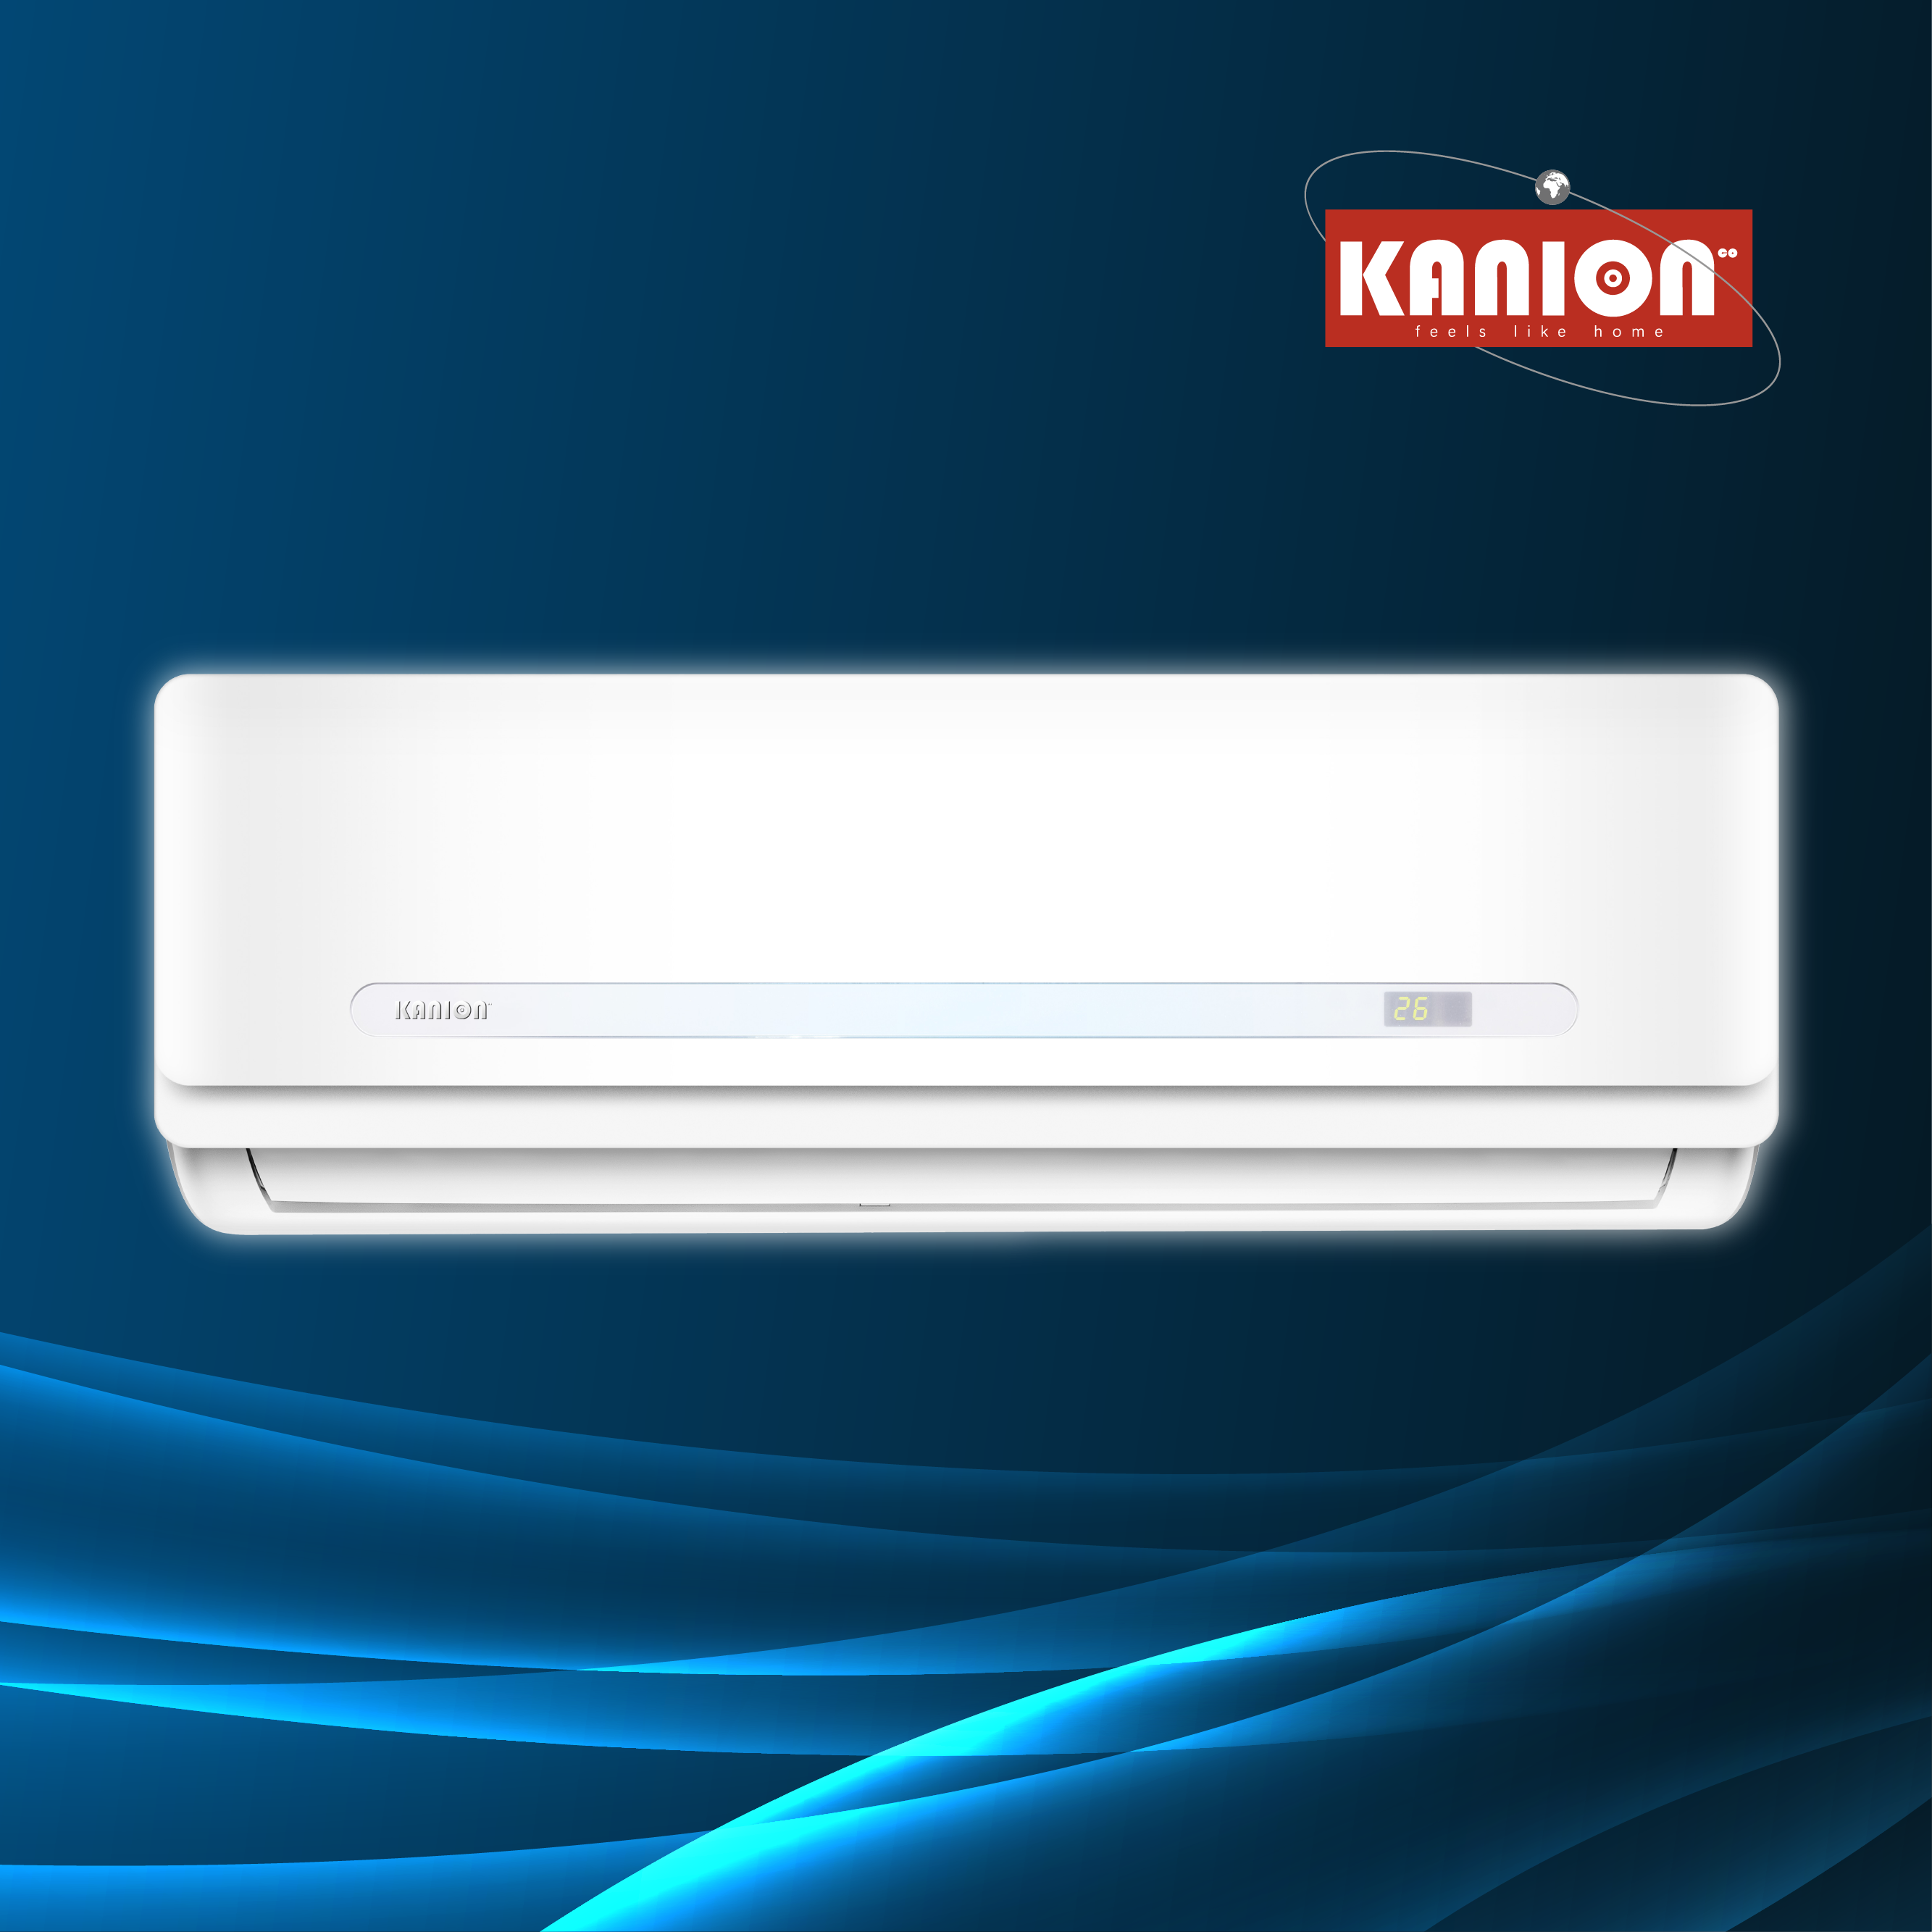 Wall Split Mounted Series Air Conditioner Designed for Saudi Arabia